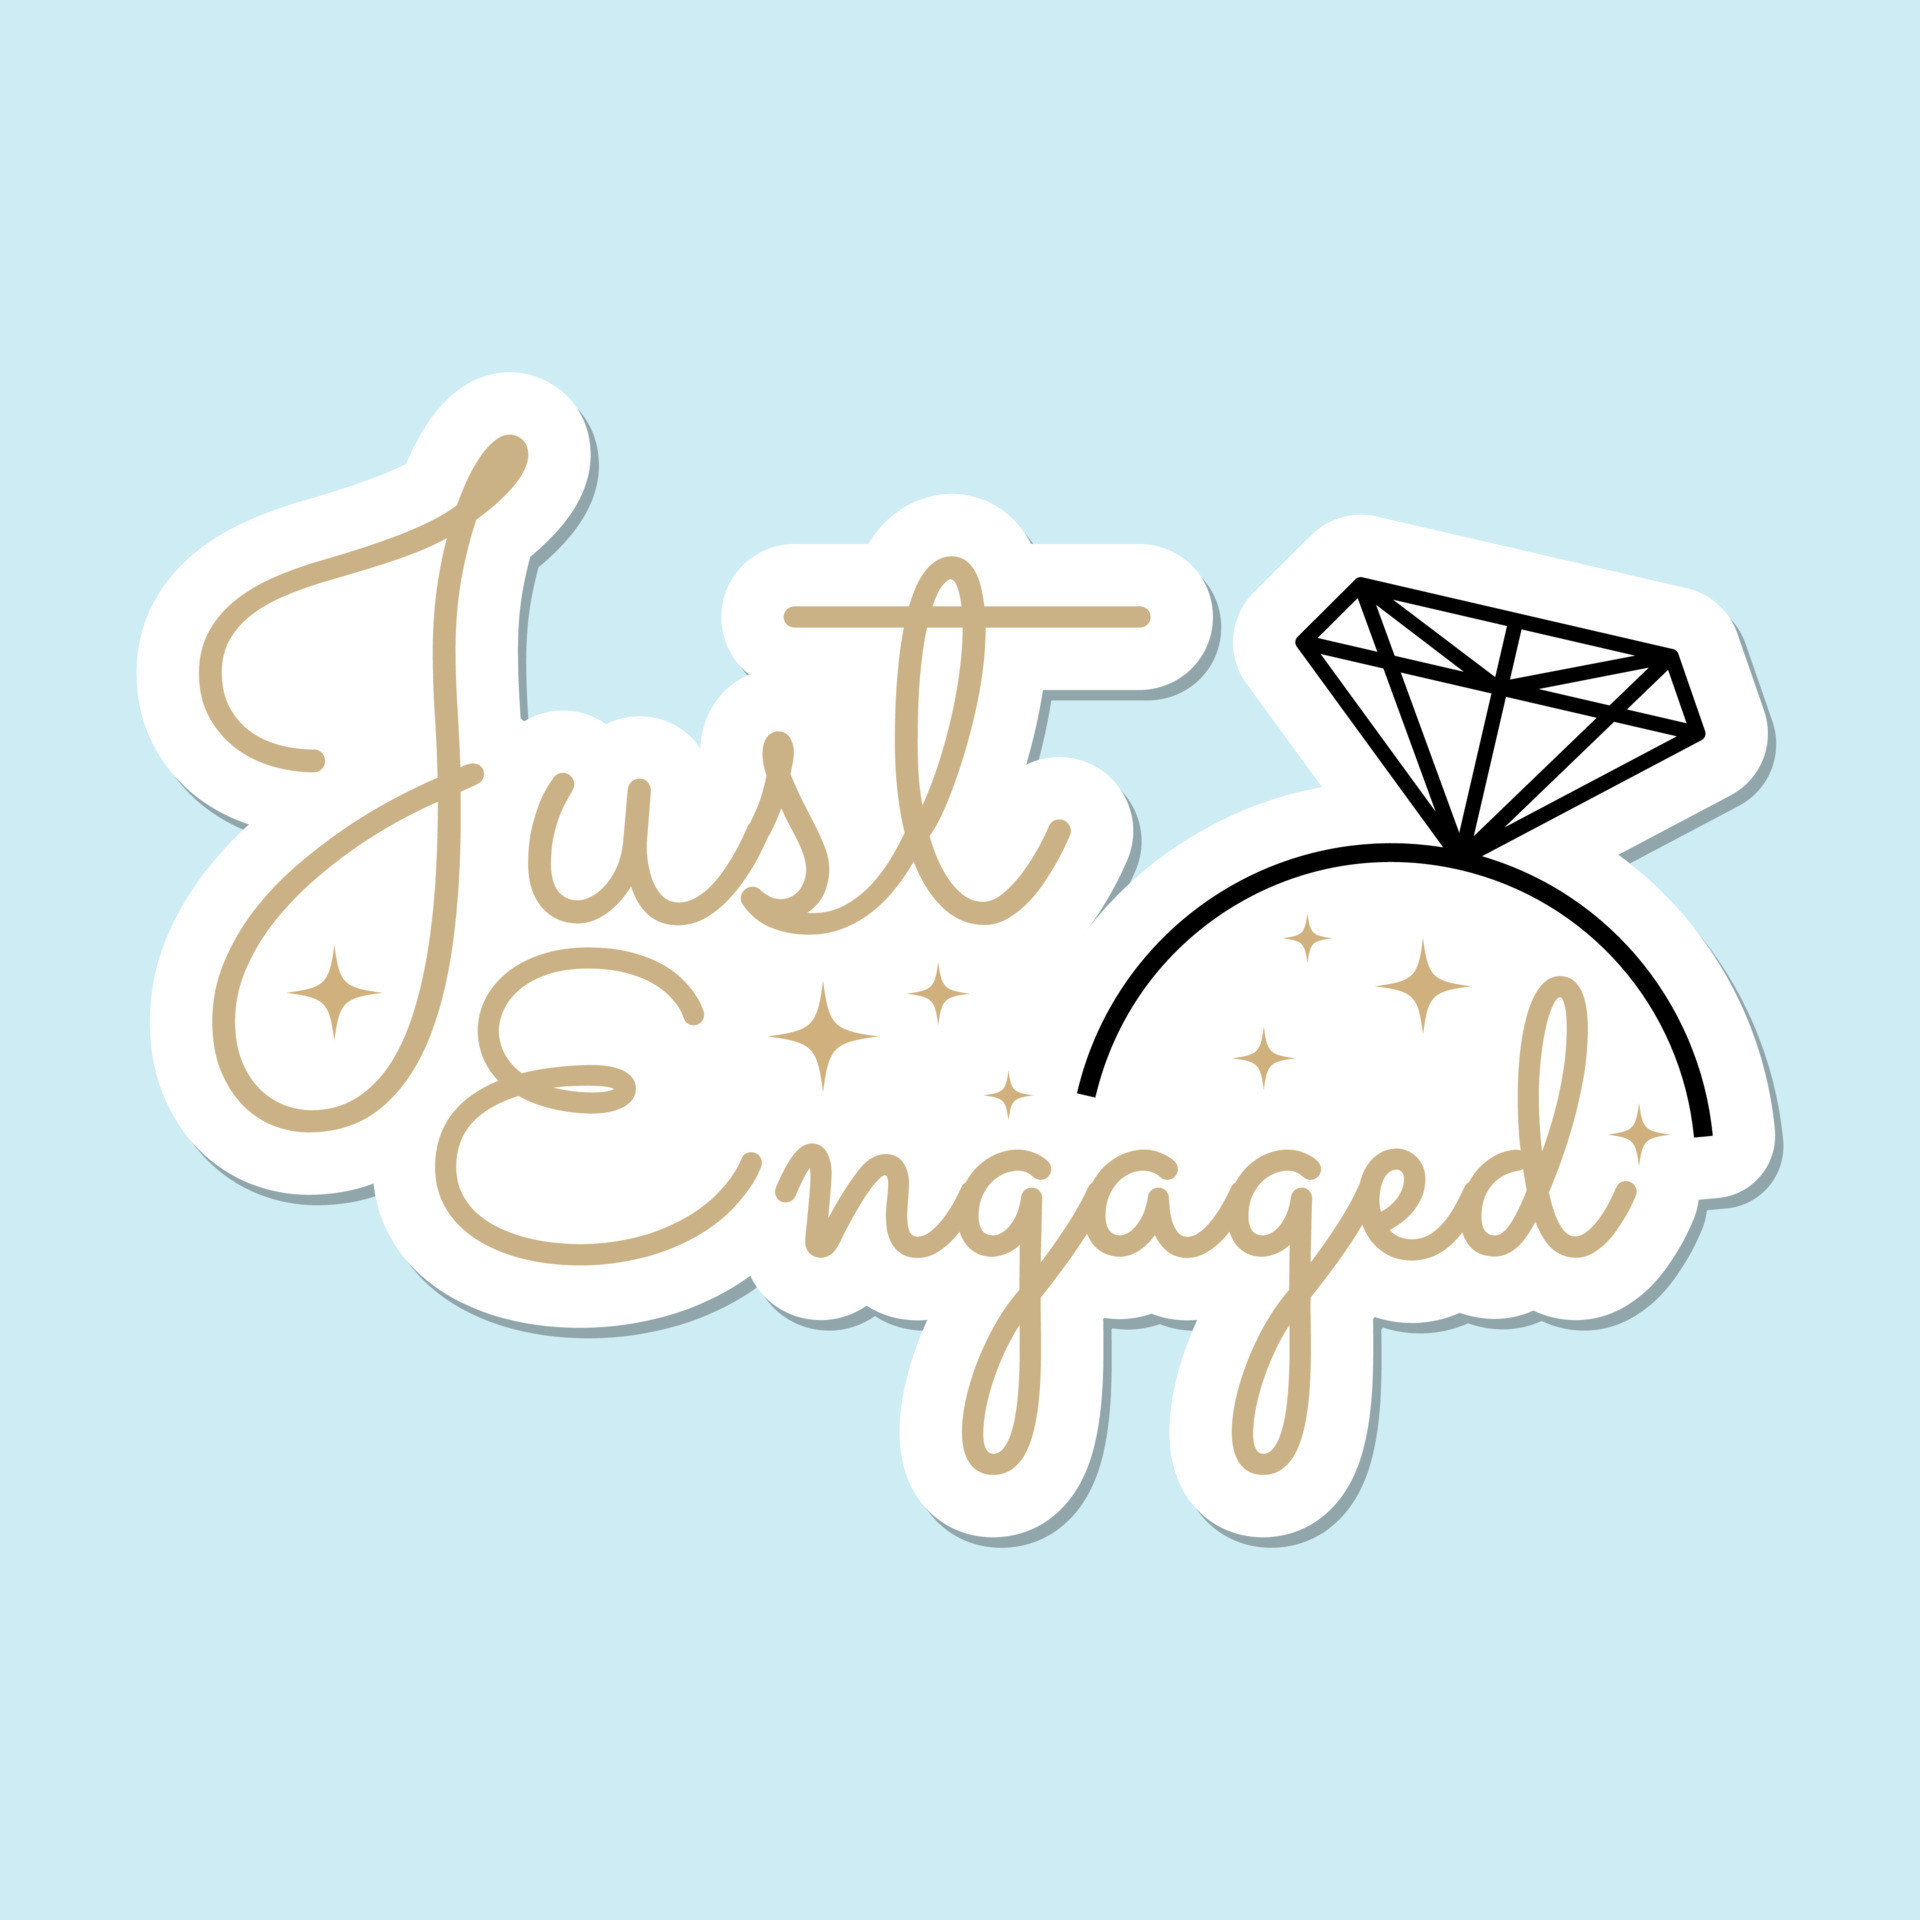 Just engaged wedding day ceremony decoration party sticker icon sign ...